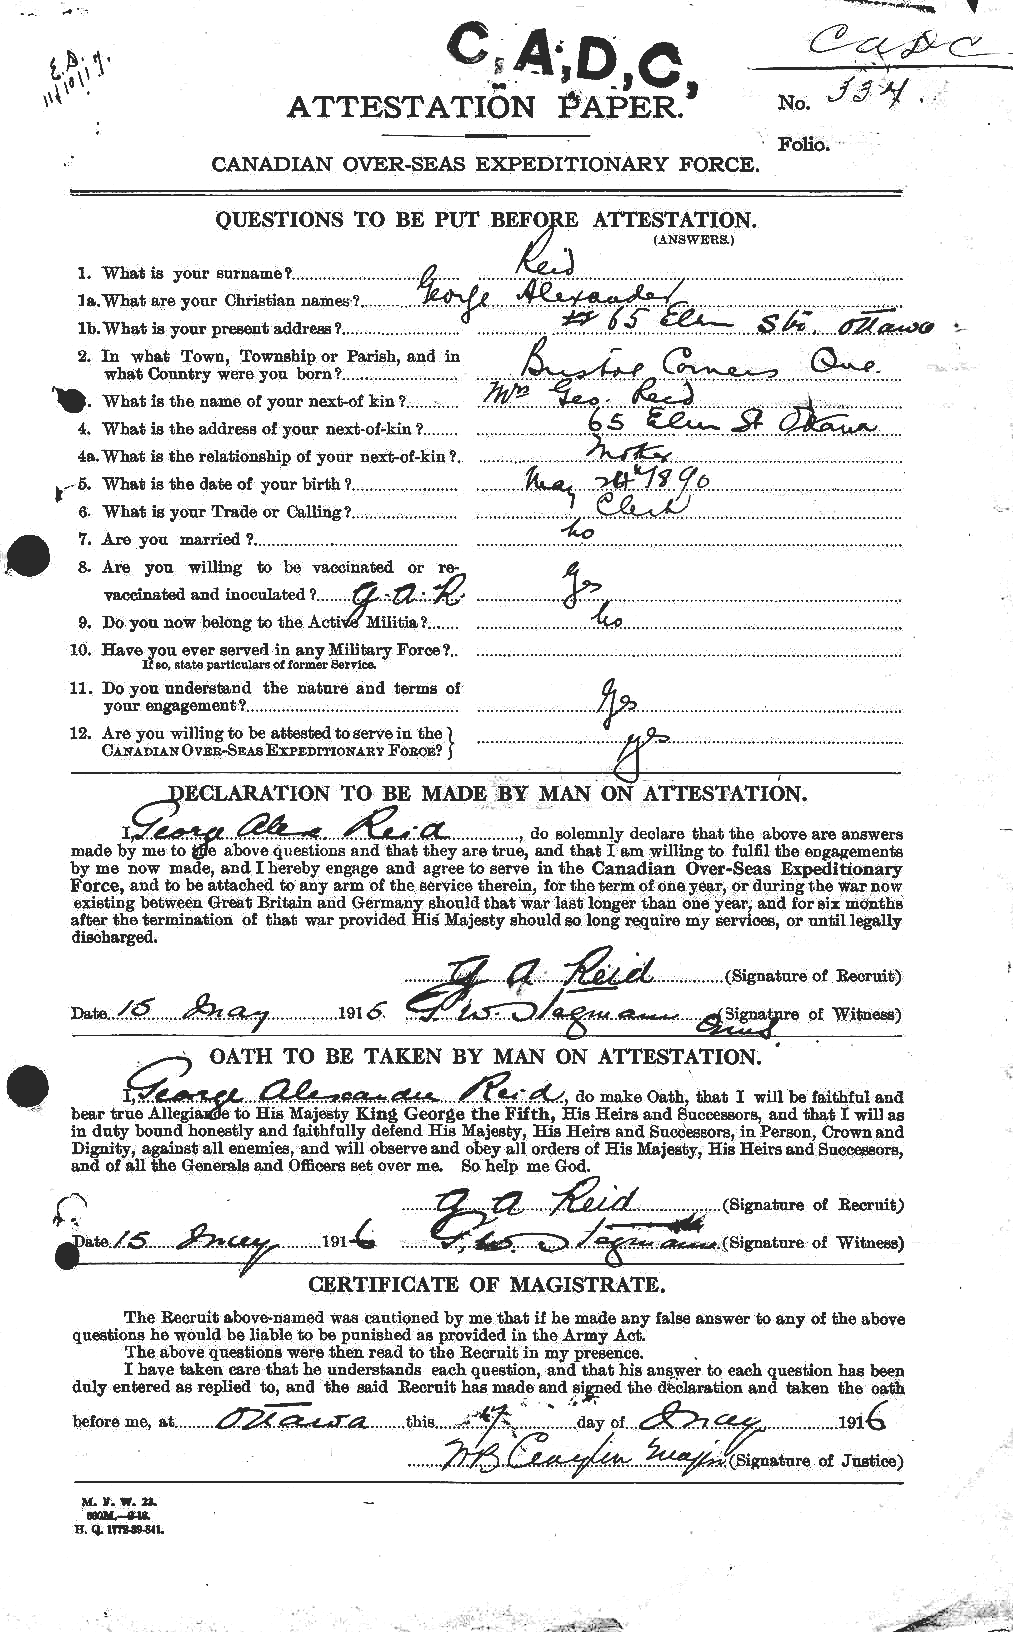 Personnel Records of the First World War - CEF 596284a